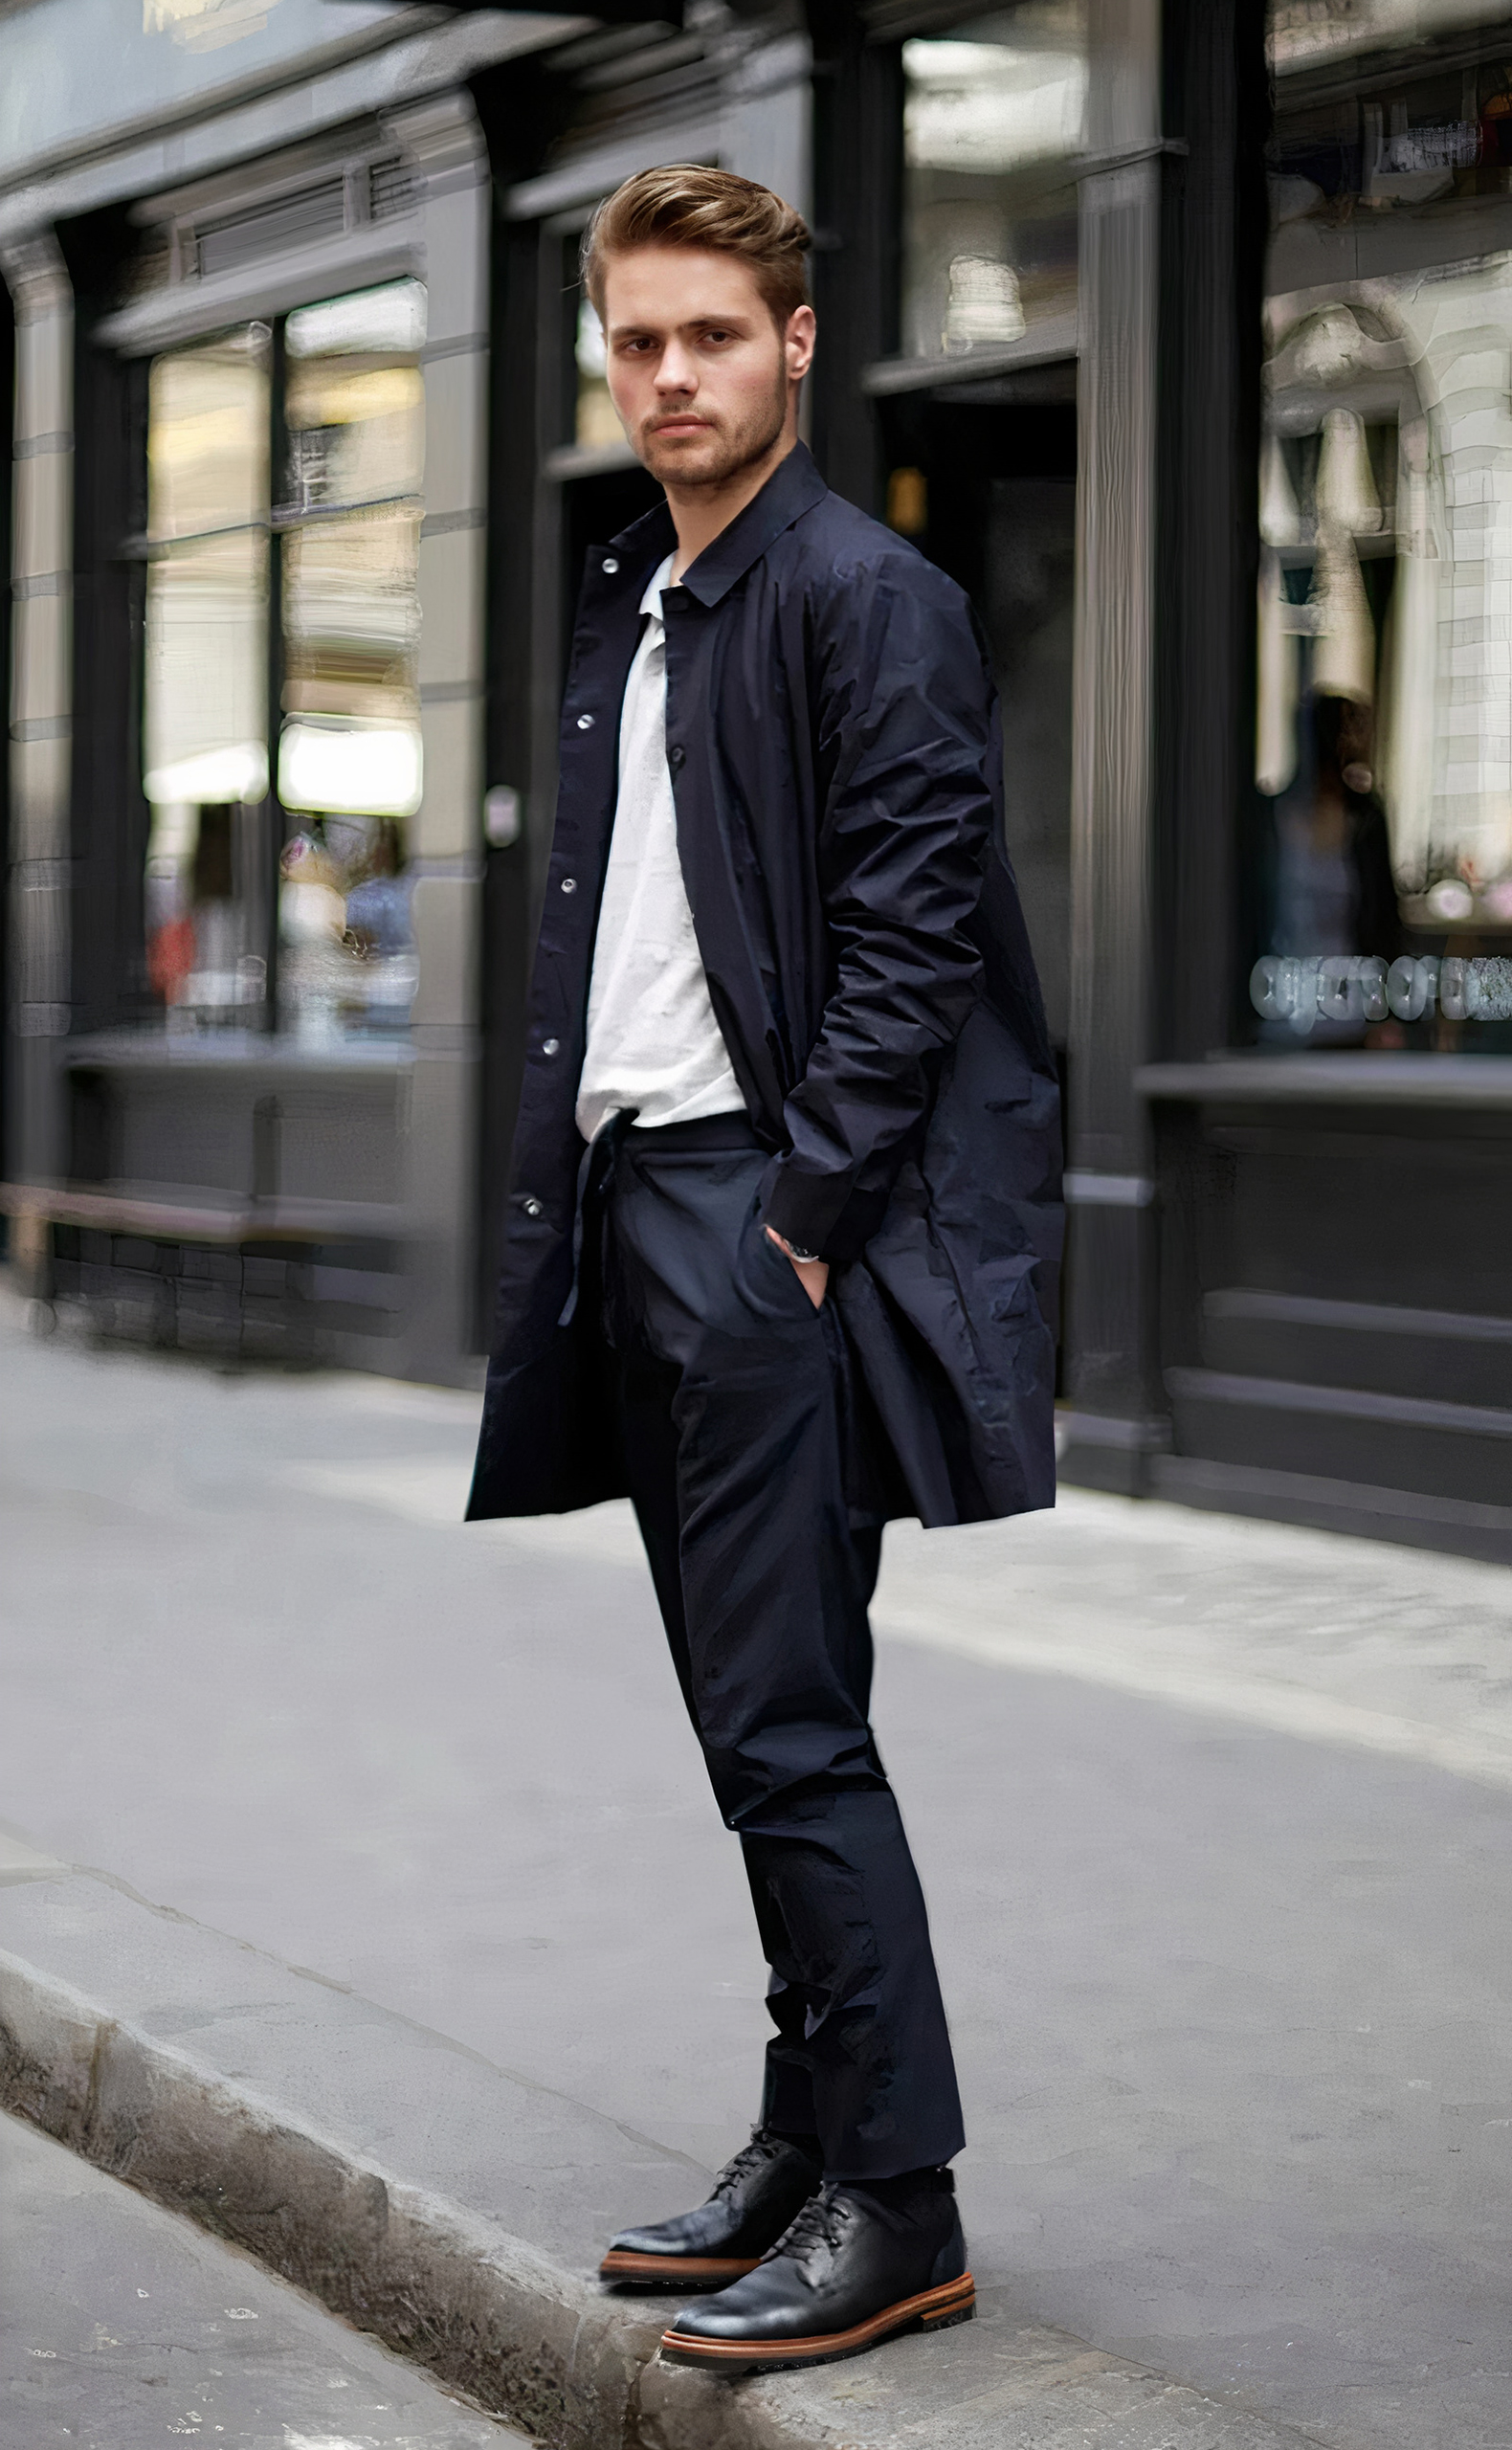 Wearing a navy coat over a white shirt, navy pants, and black shoes